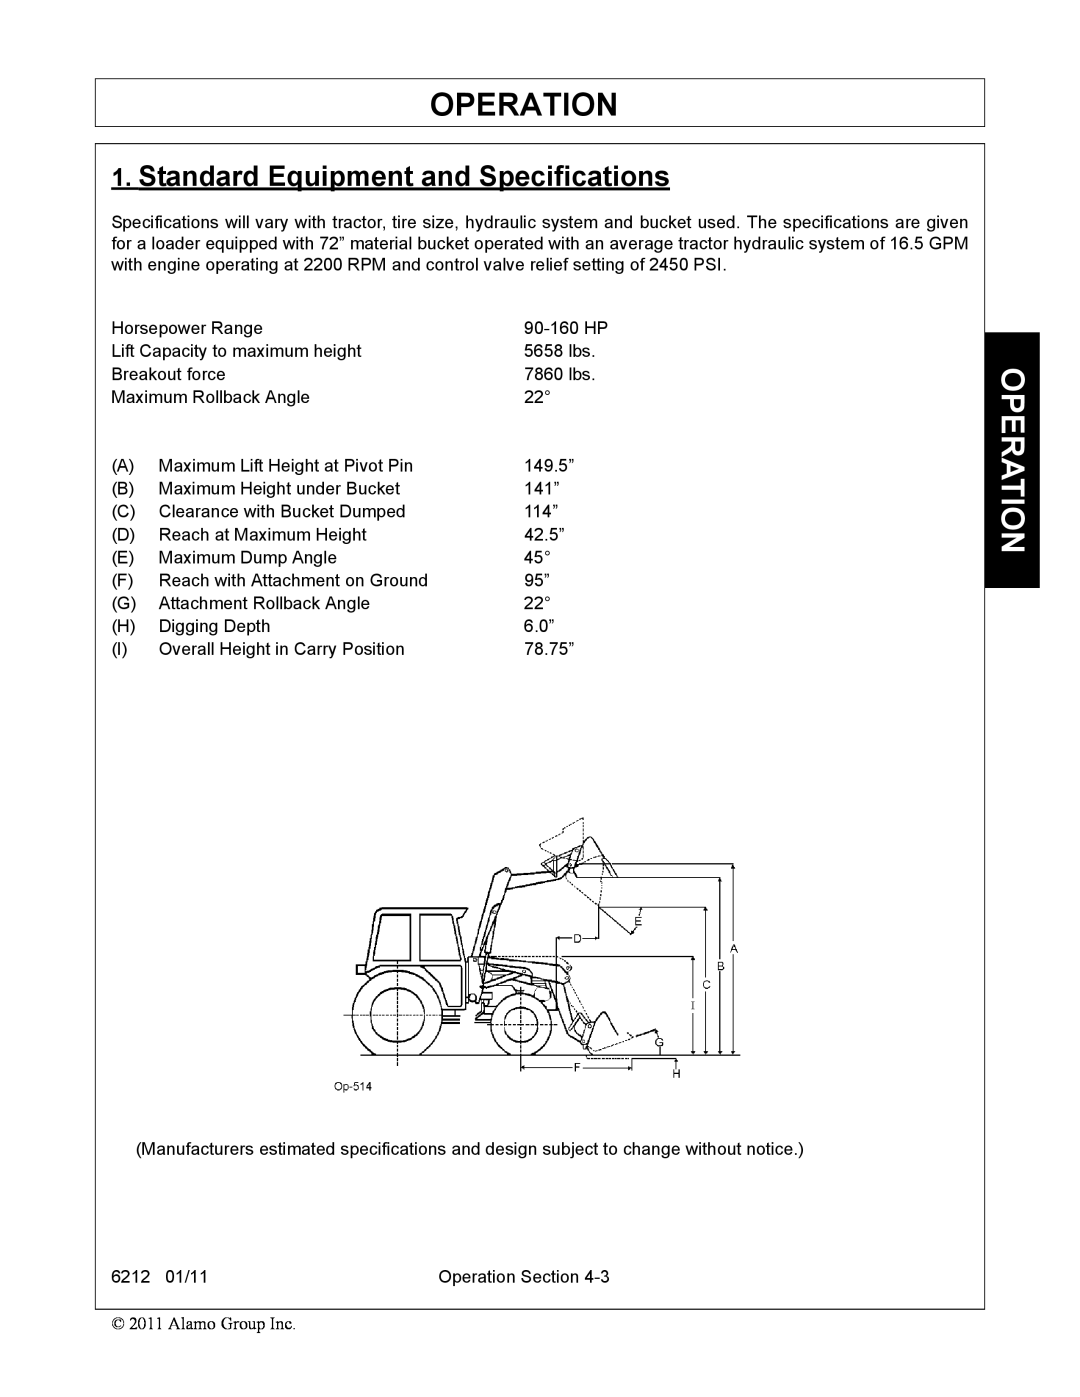 Alamo 6212 manual Operation, Standard Equipment and Specifications 